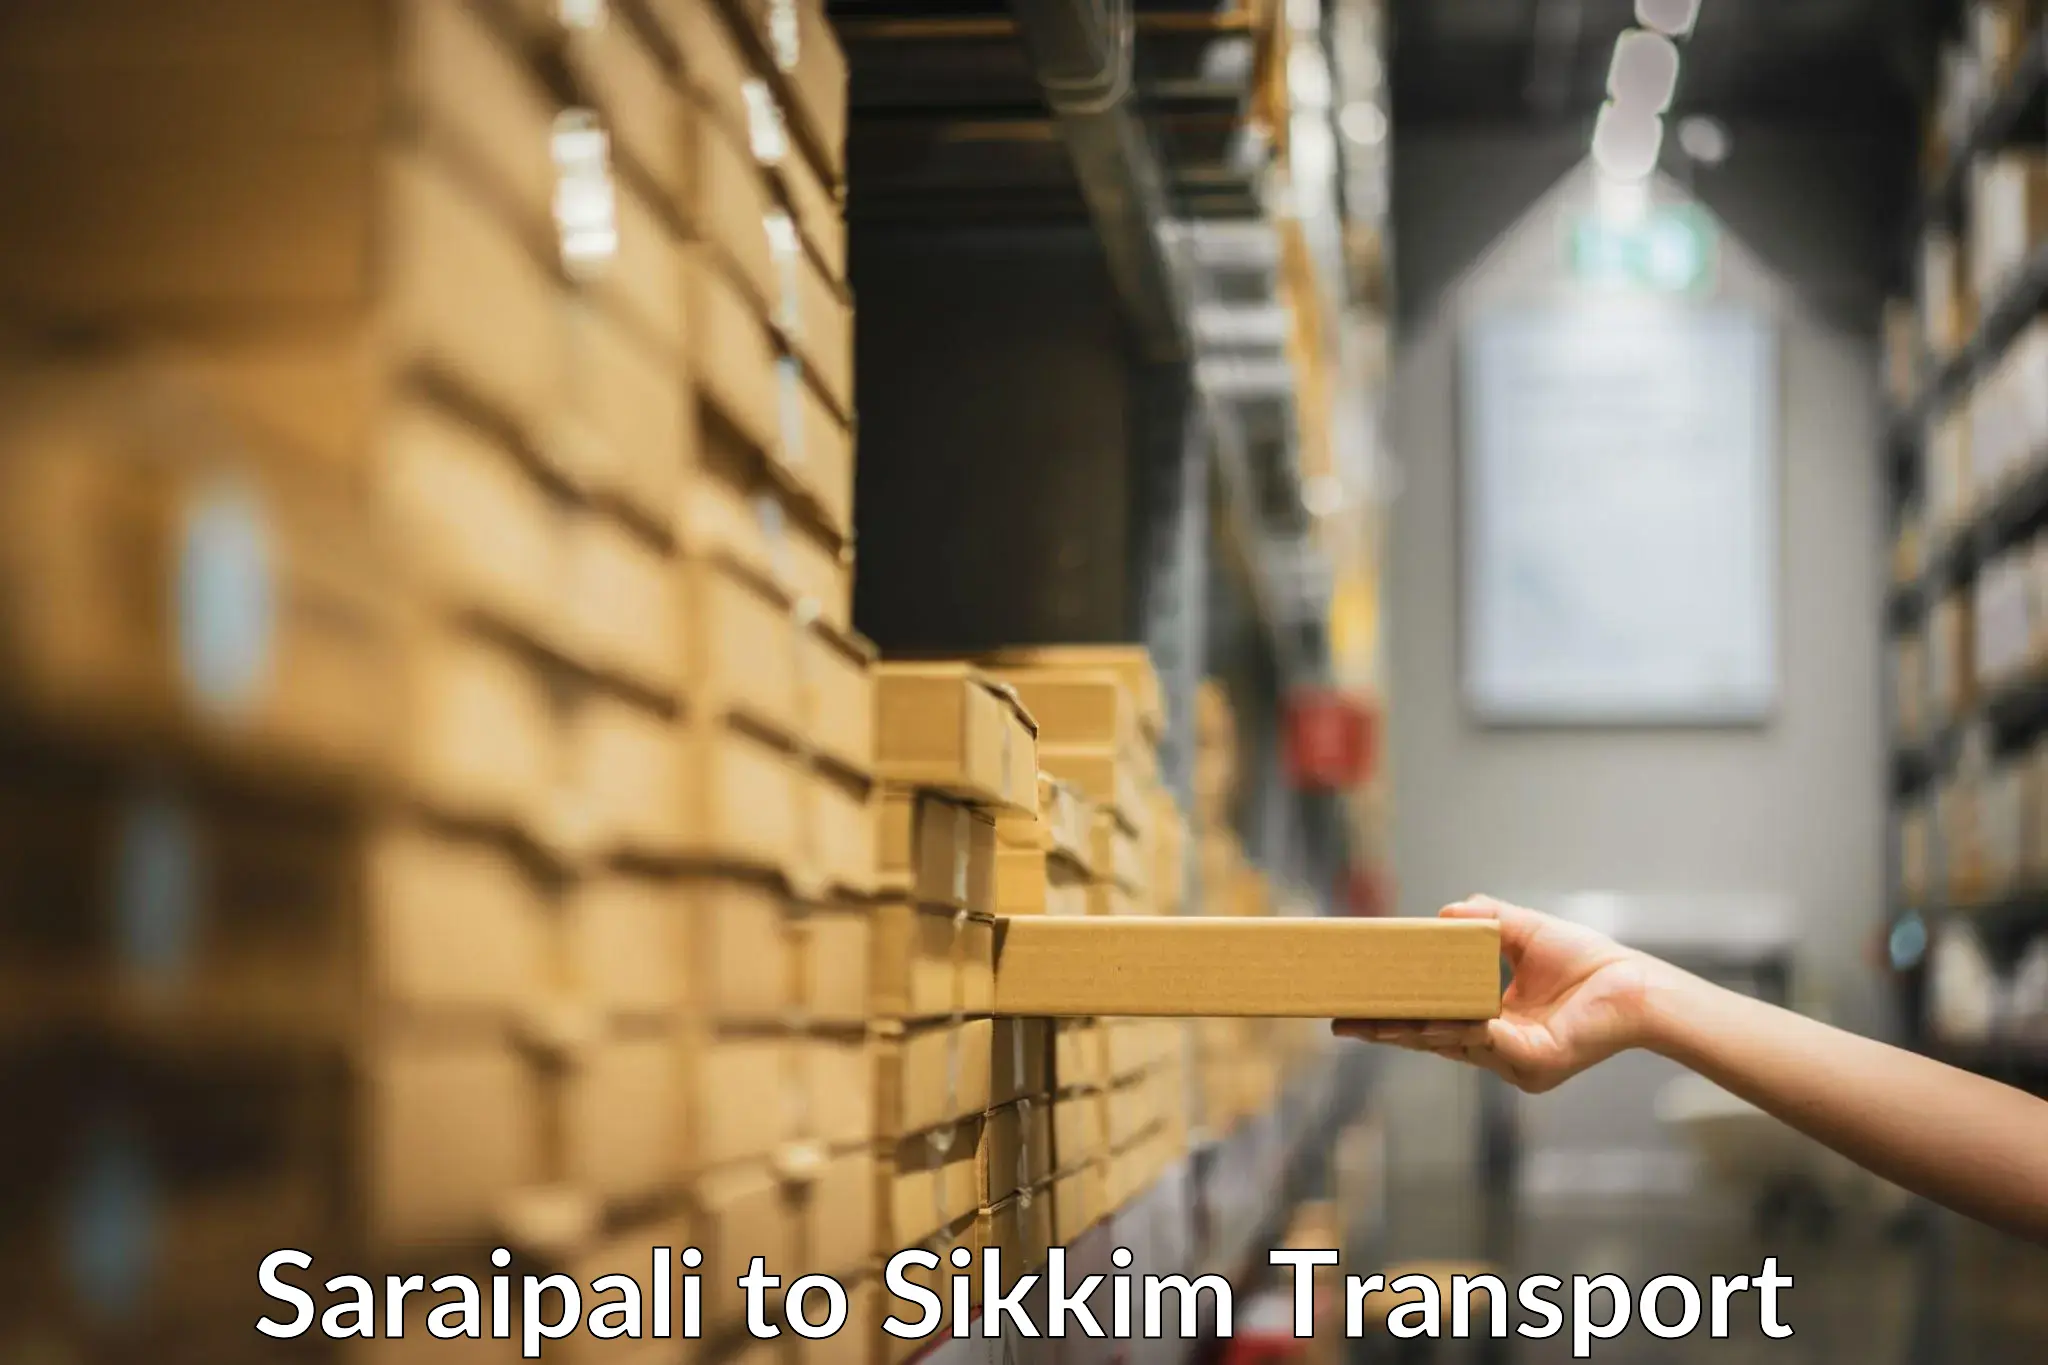 Daily transport service Saraipali to East Sikkim